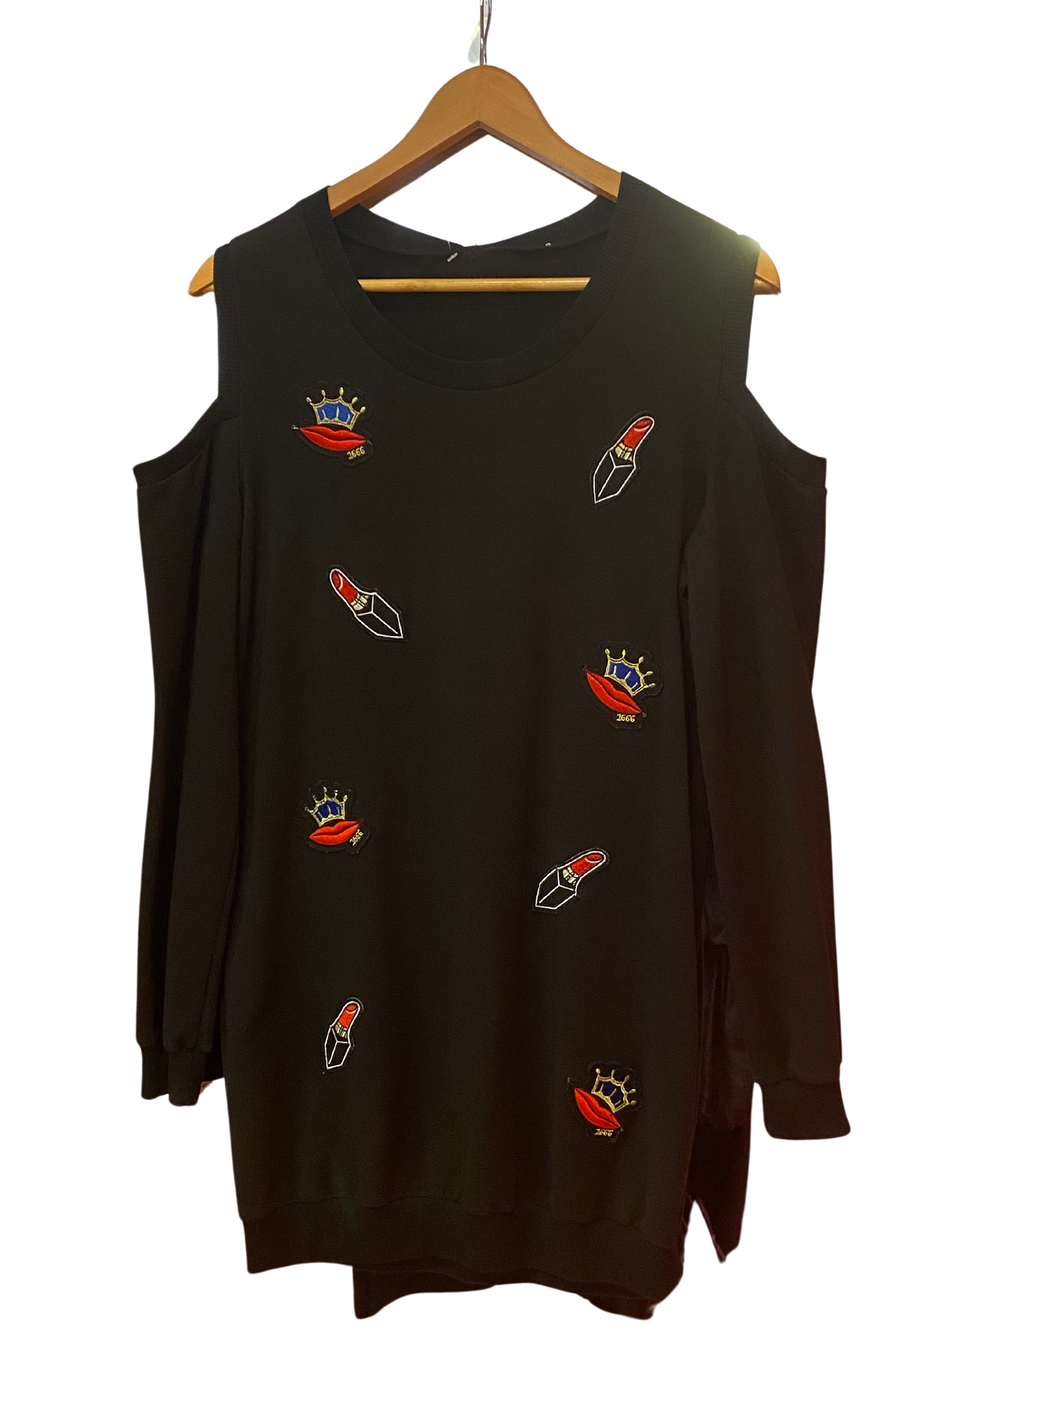 Jumper Dress with Patches